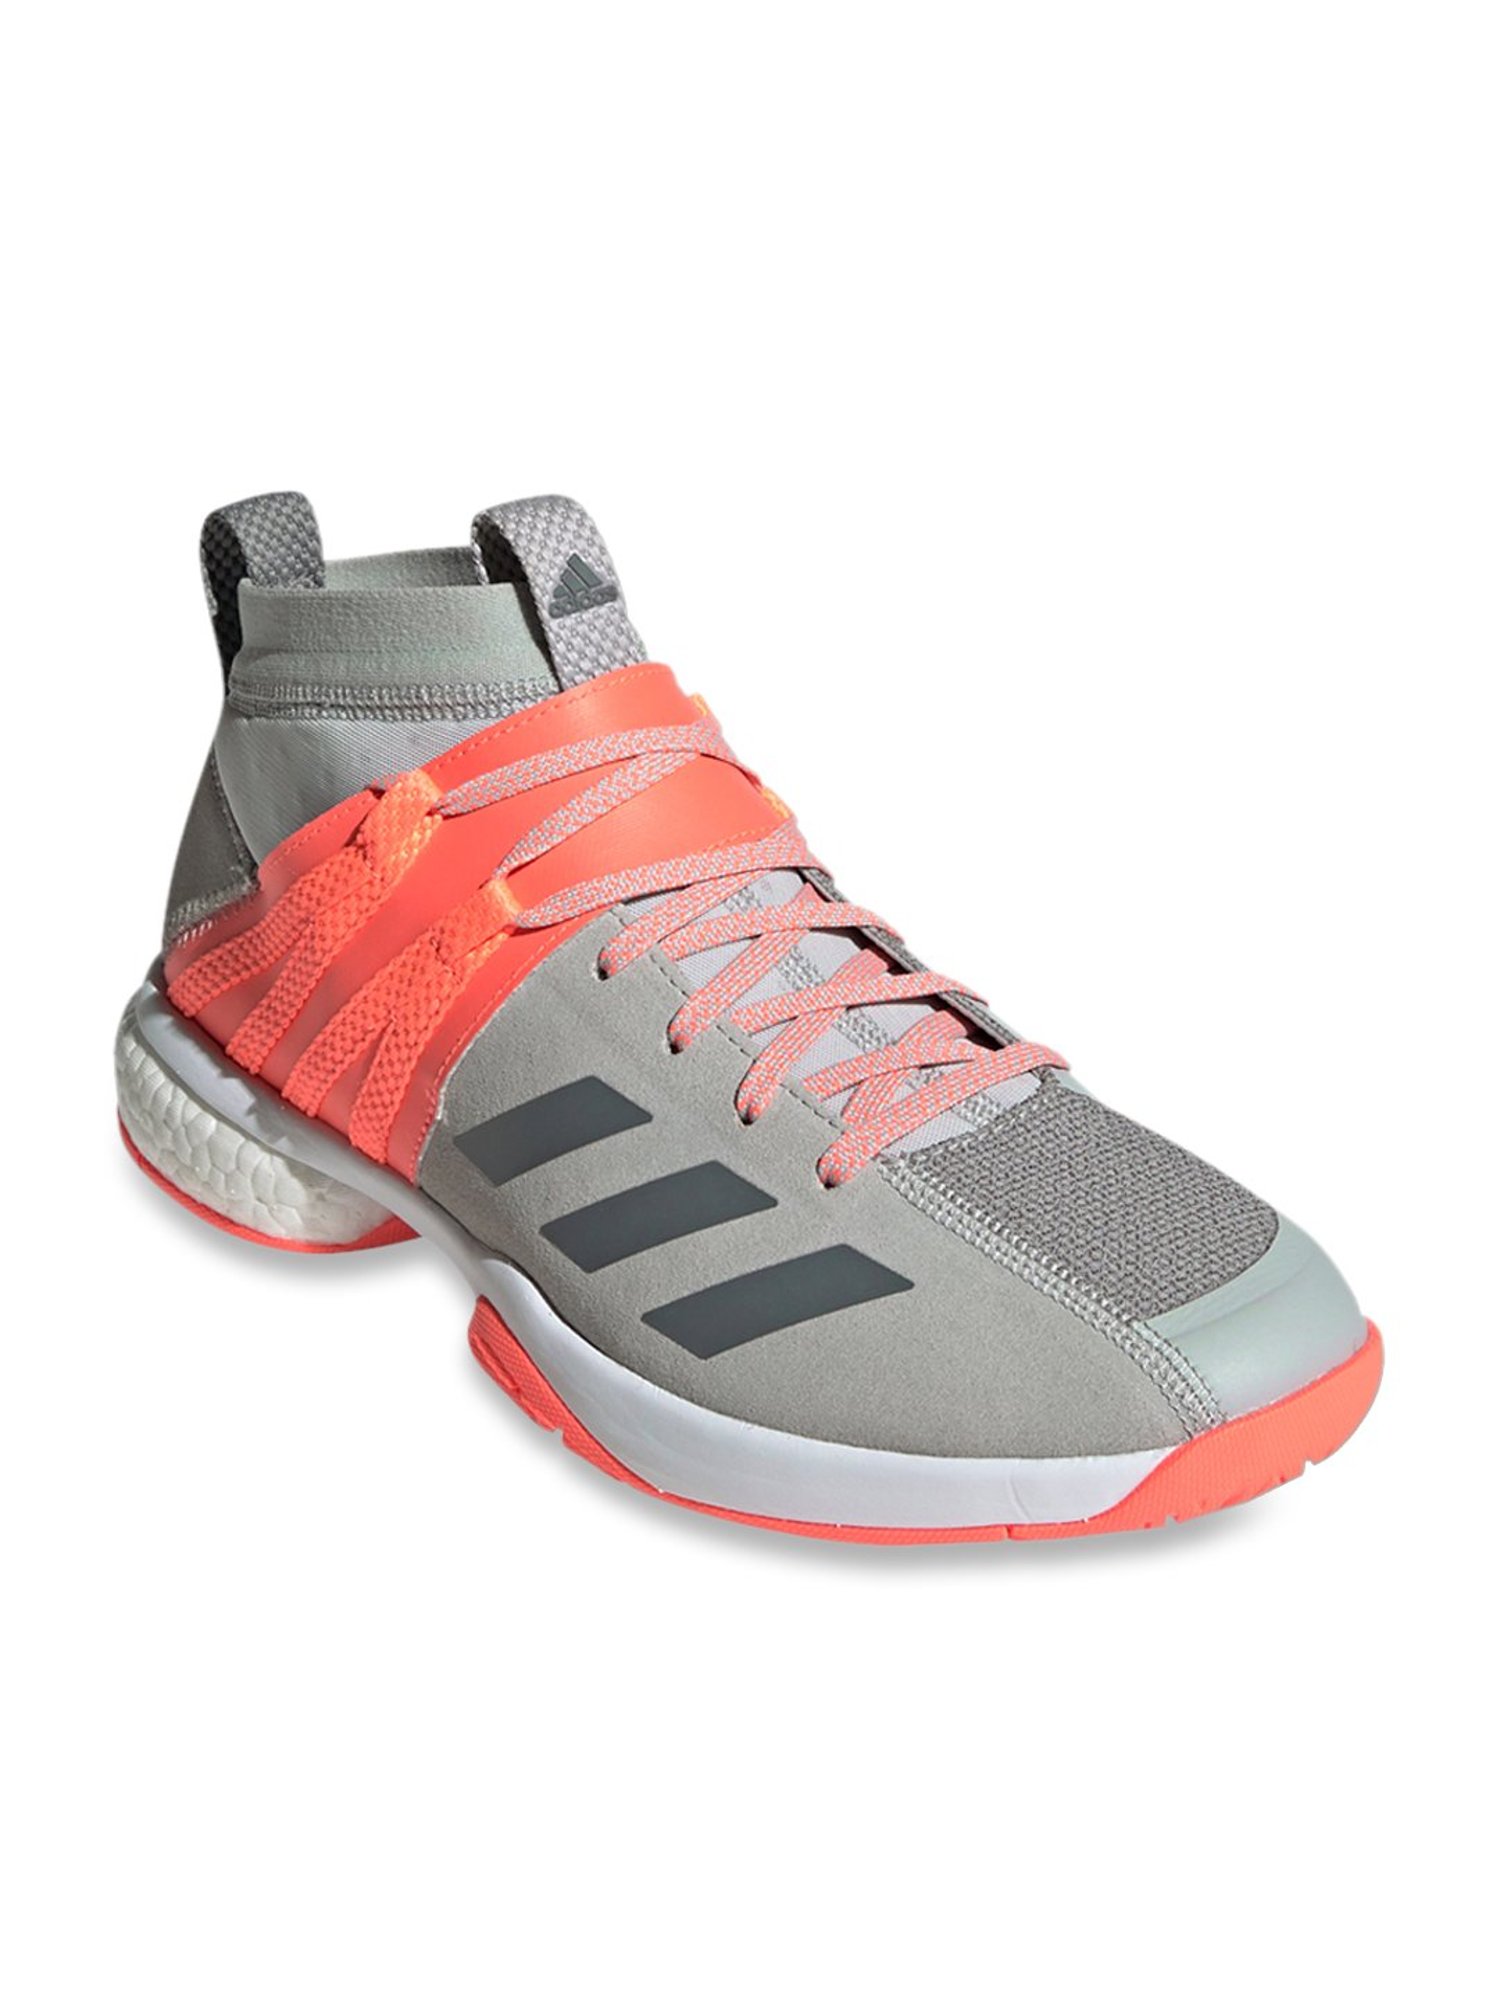 Buy Adidas Wucht P8.1 Grey Badminton Shoes for Men at Best Price Tata CLiQ